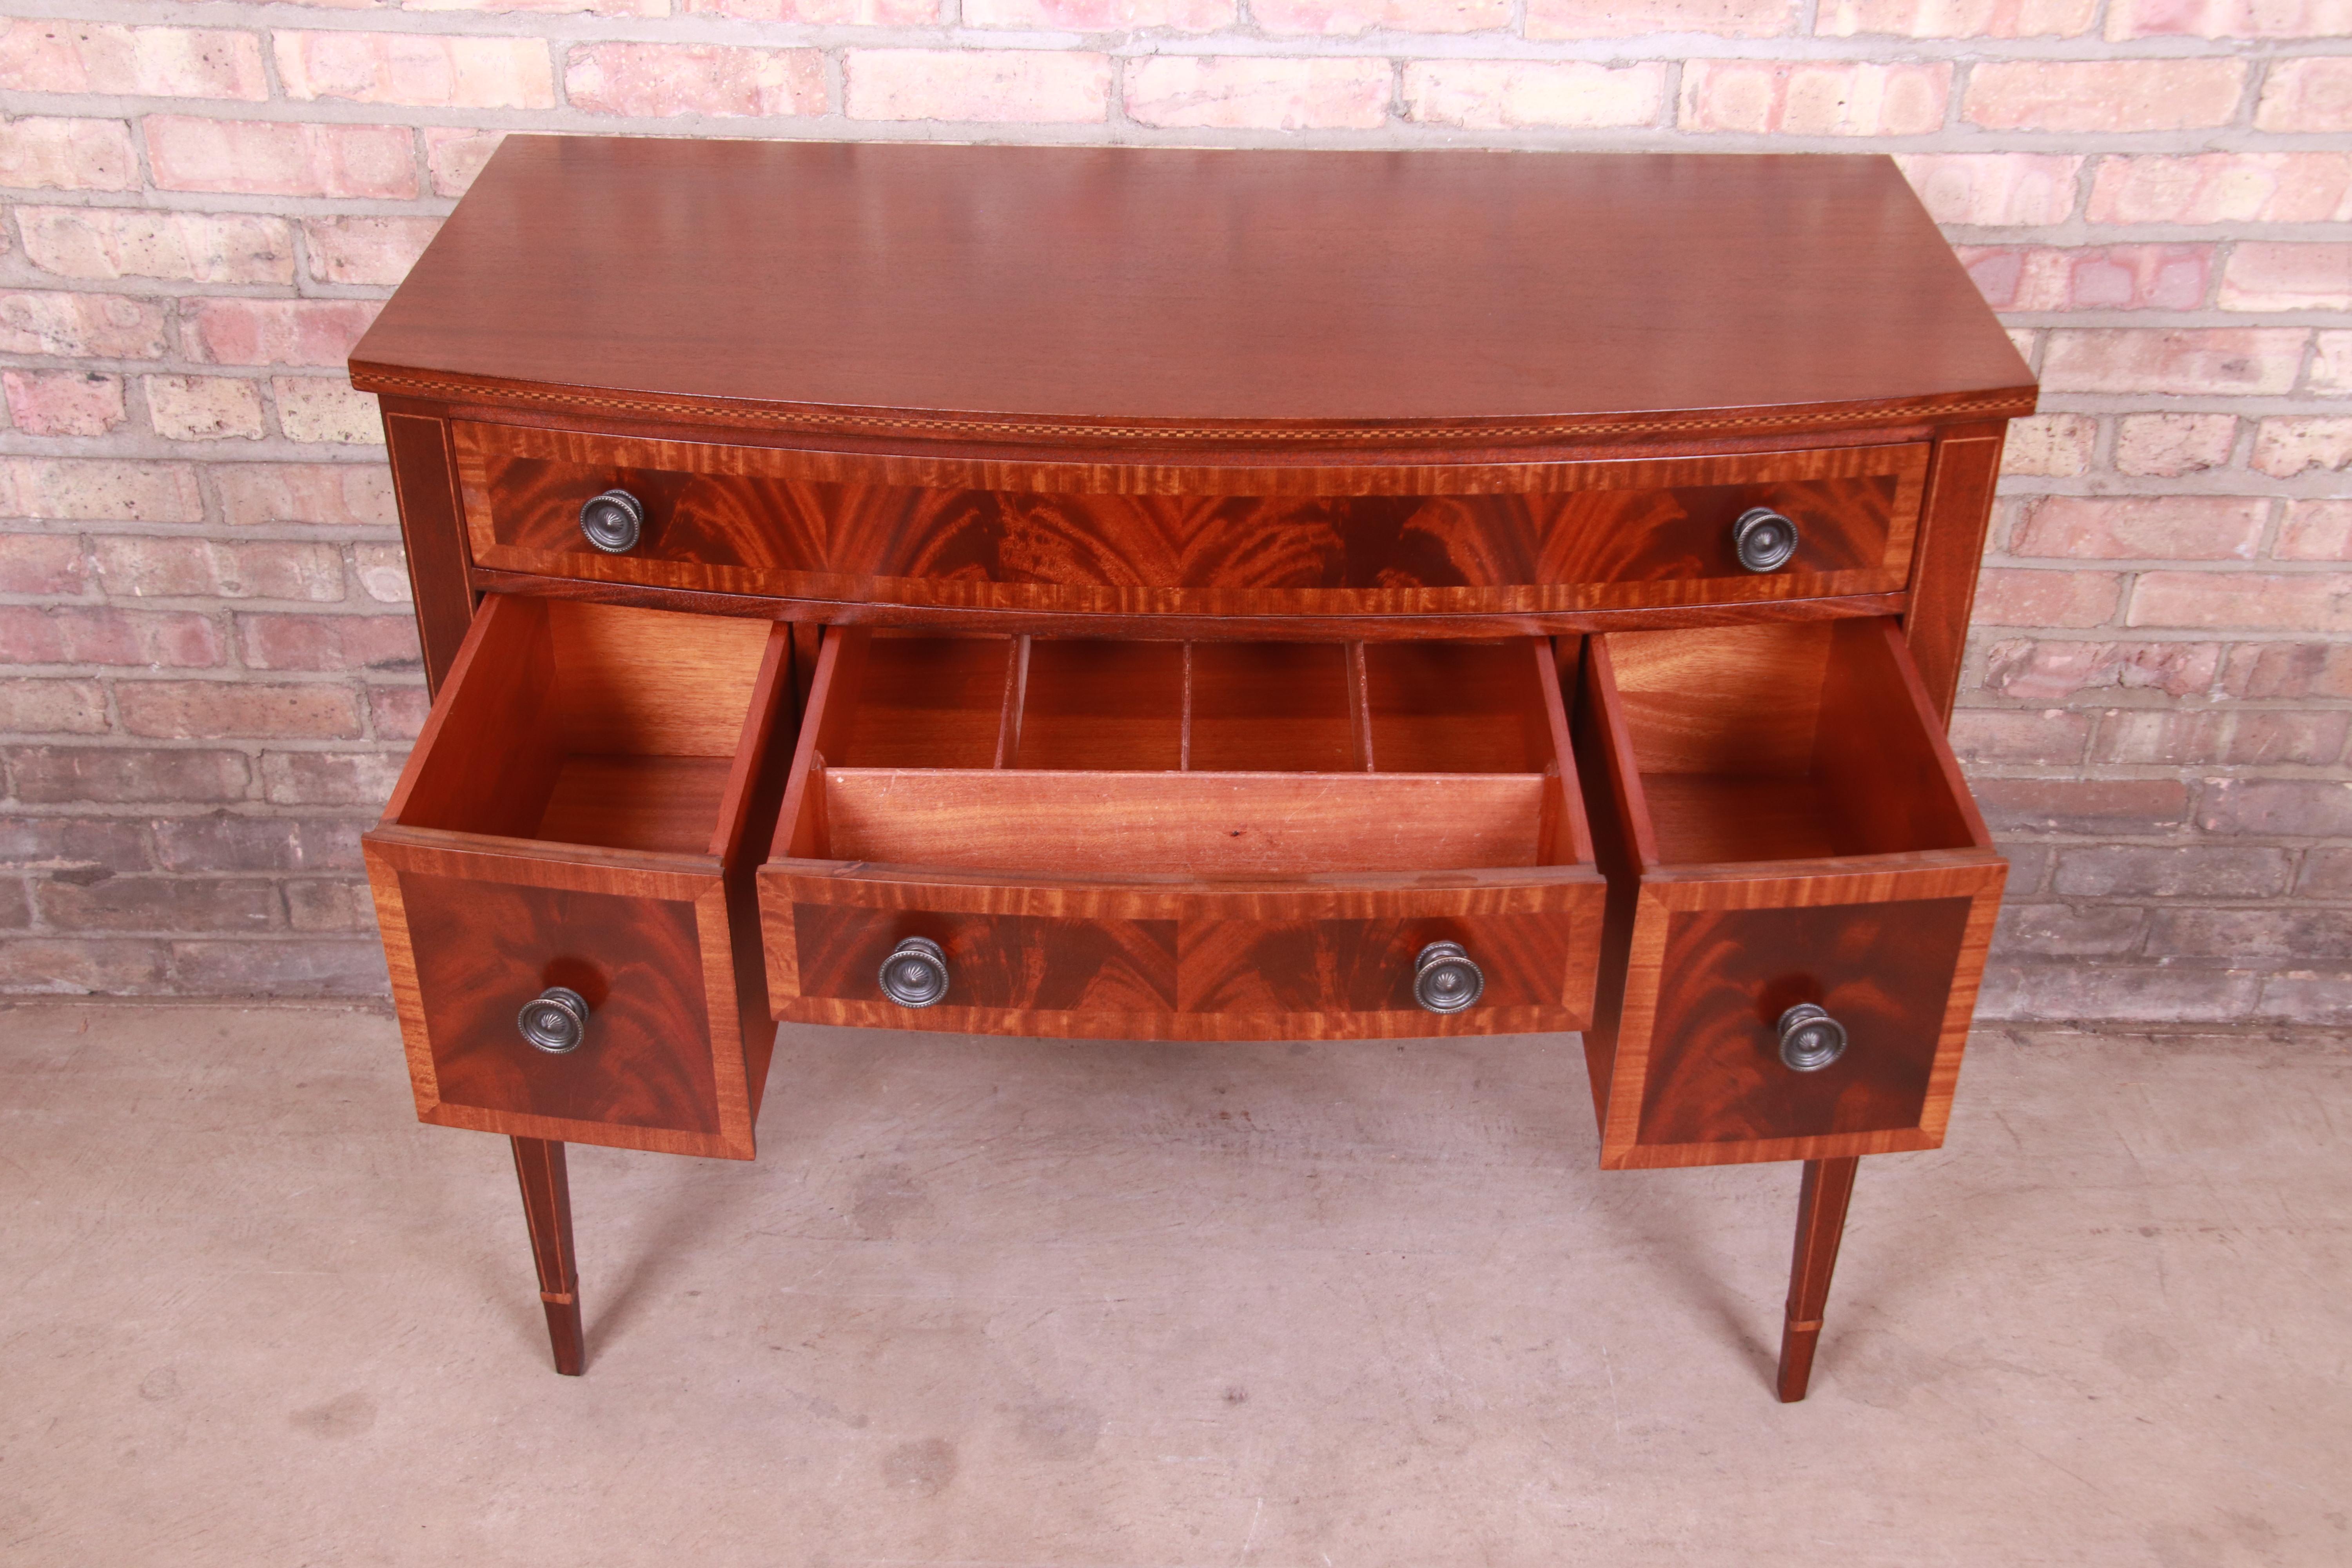 Mid-20th Century Landstrom Georgian Flame Mahogany Sideboard Buffet or Bar Server, Refinished